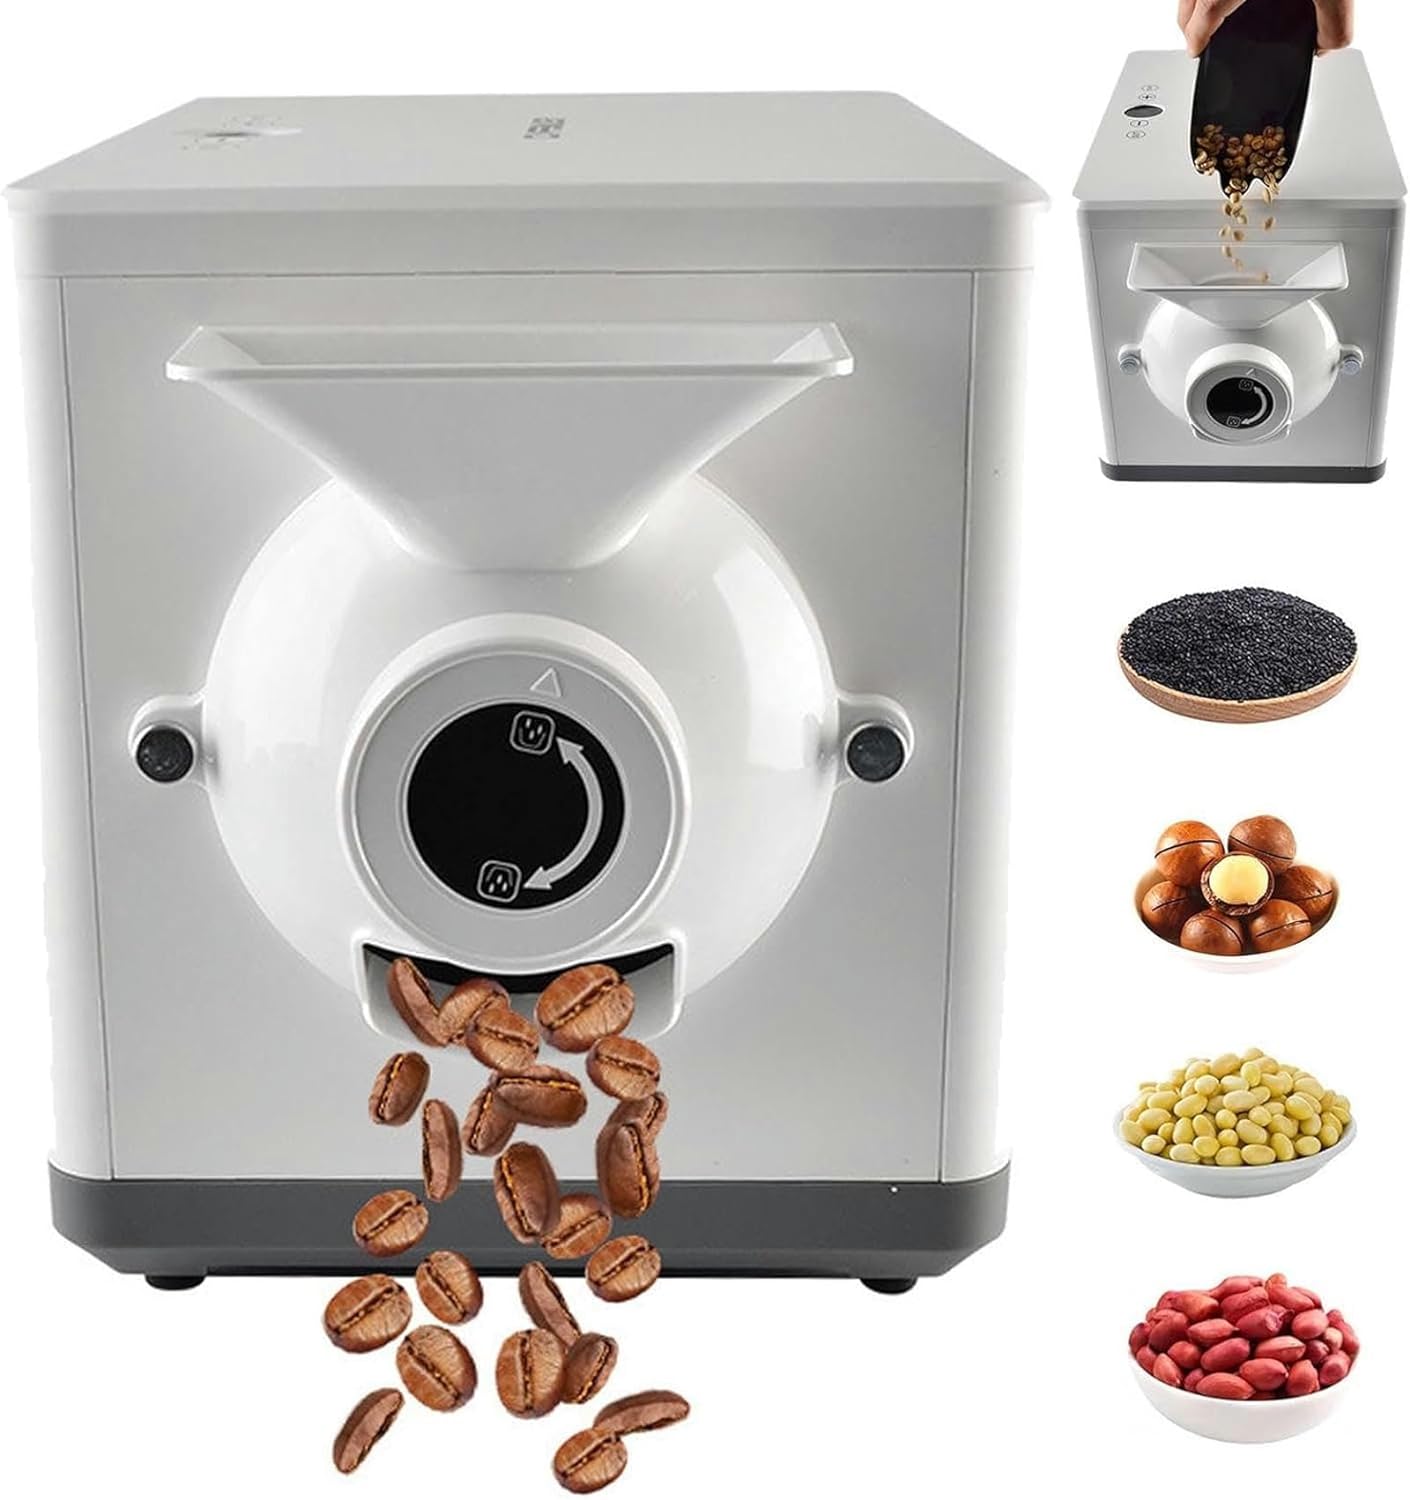 Cnaohghn Commercial Coffee Roasting Machine Review